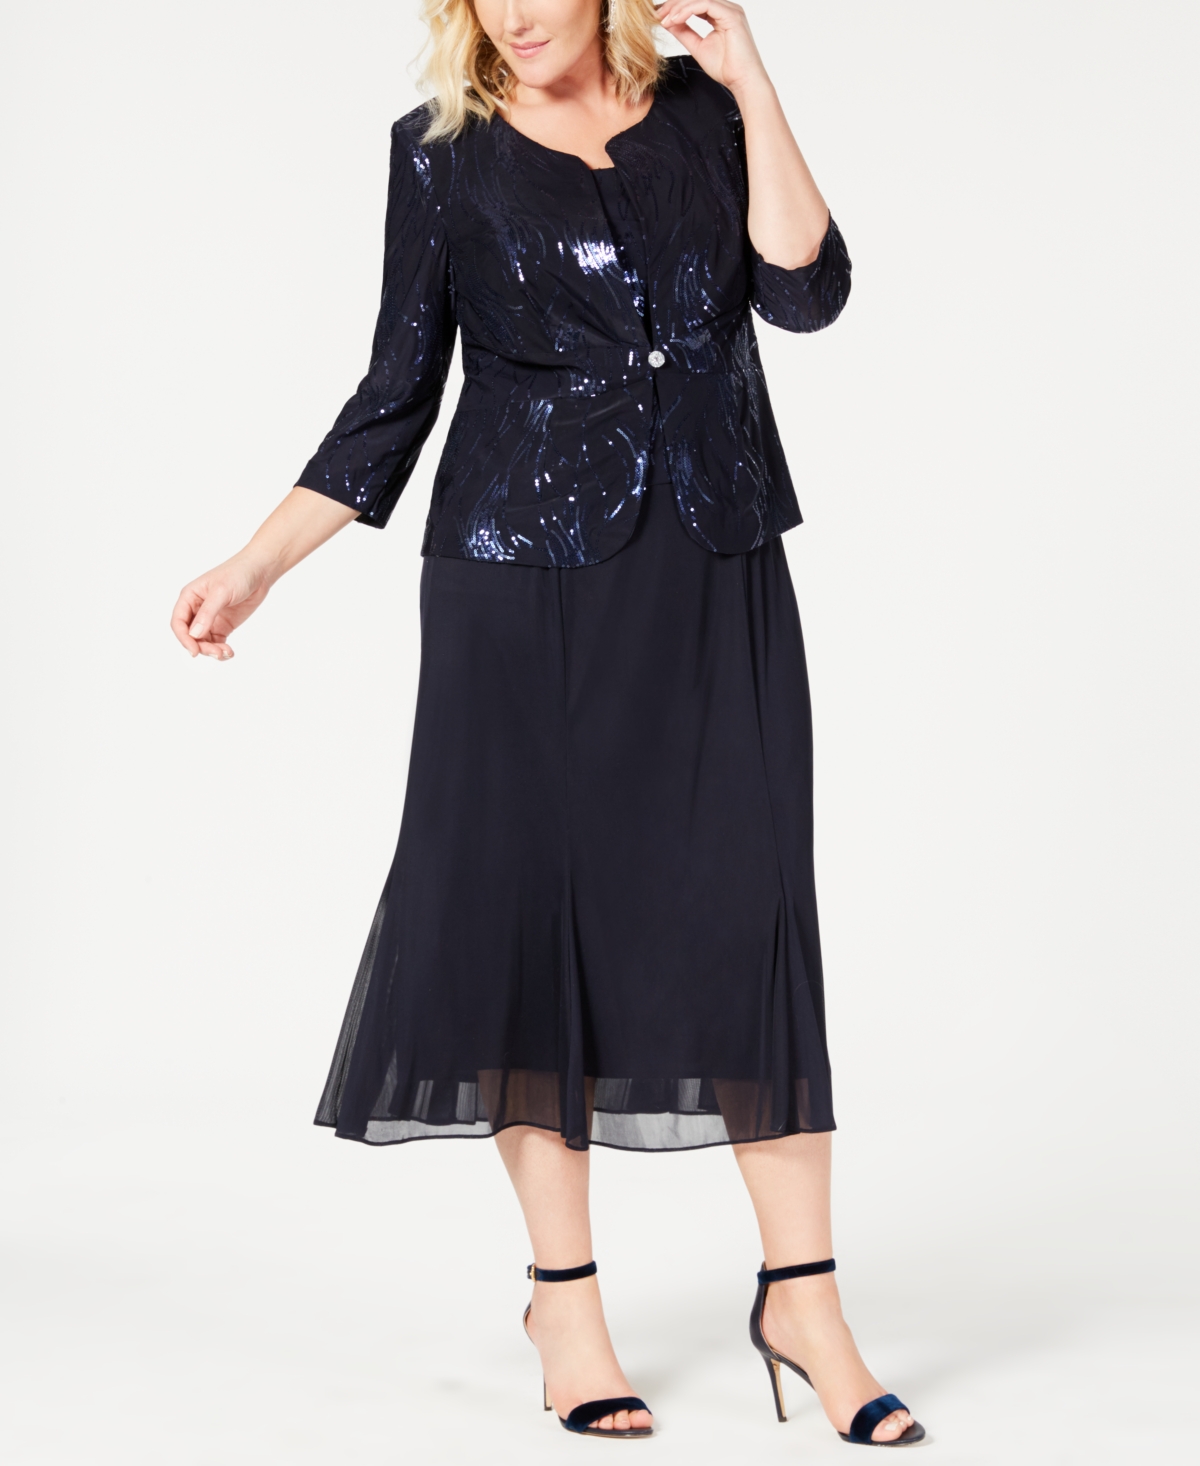 Plus Size Sequined Chiffon Dress and Jacket - Navy